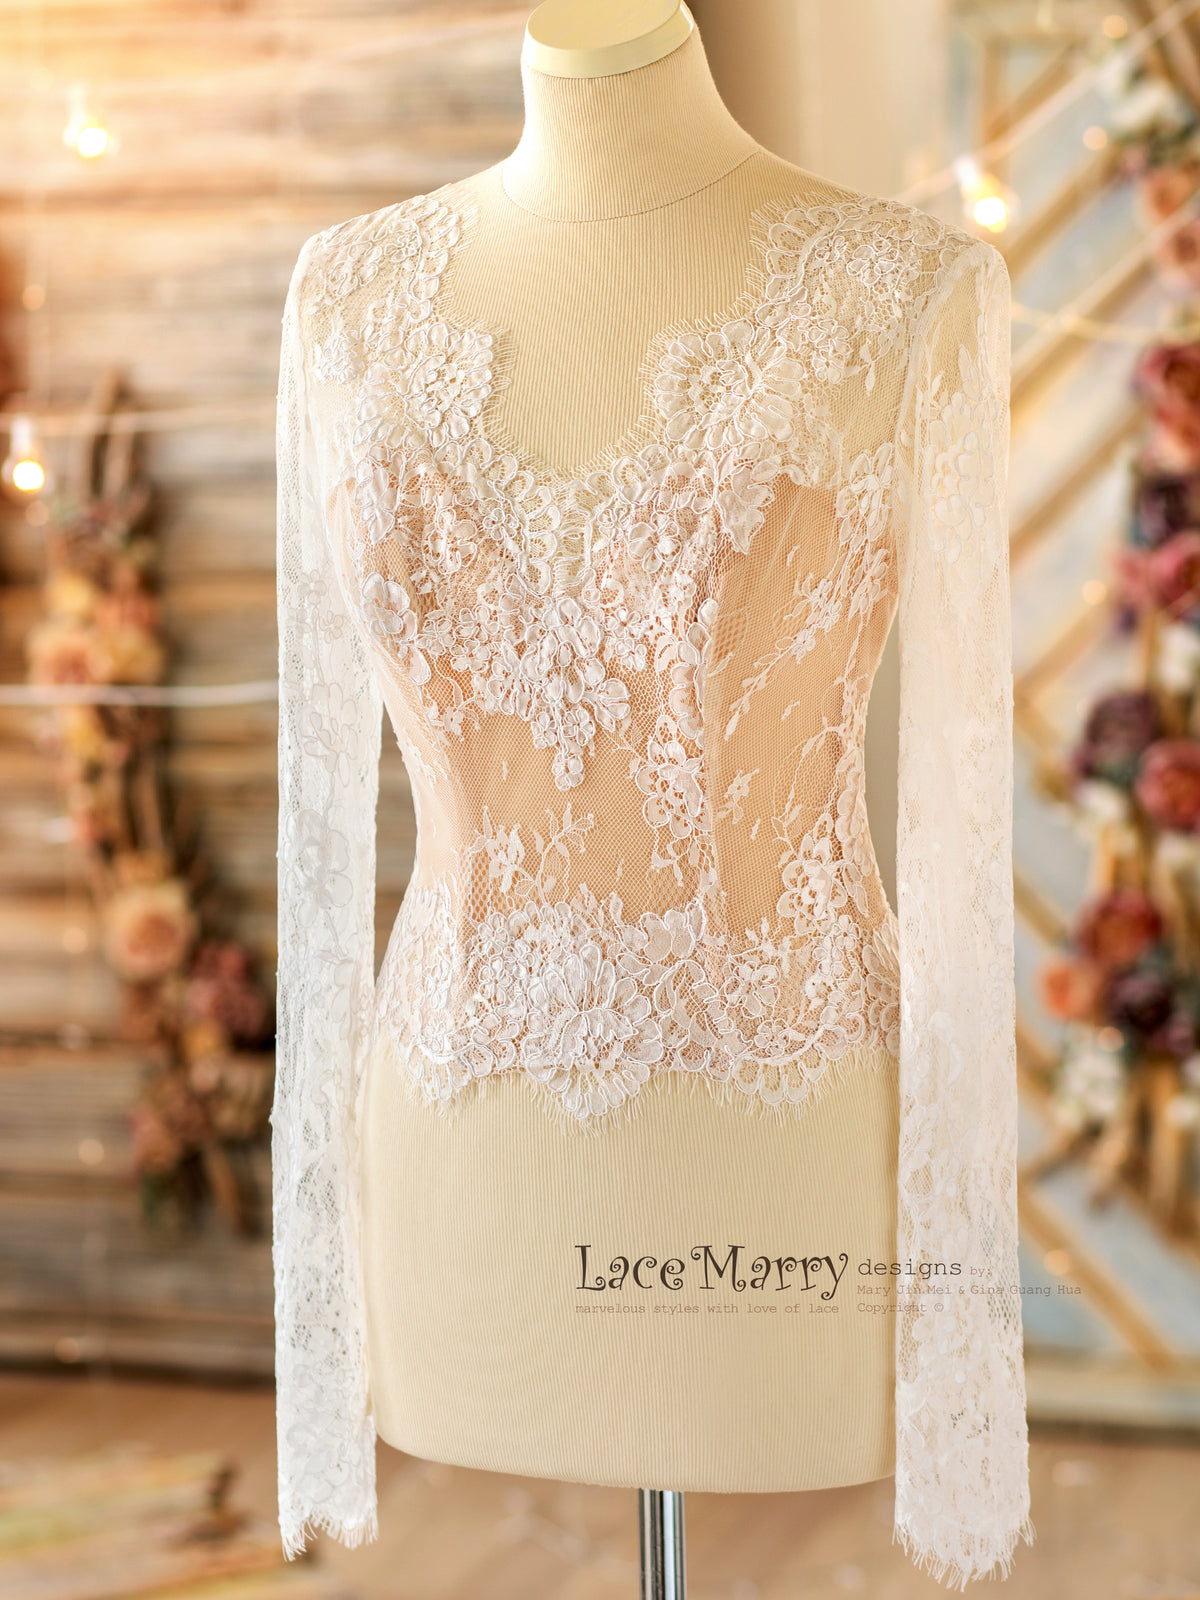 Boho Bridal Lace Top with V Neck and Long Lace Sleeves